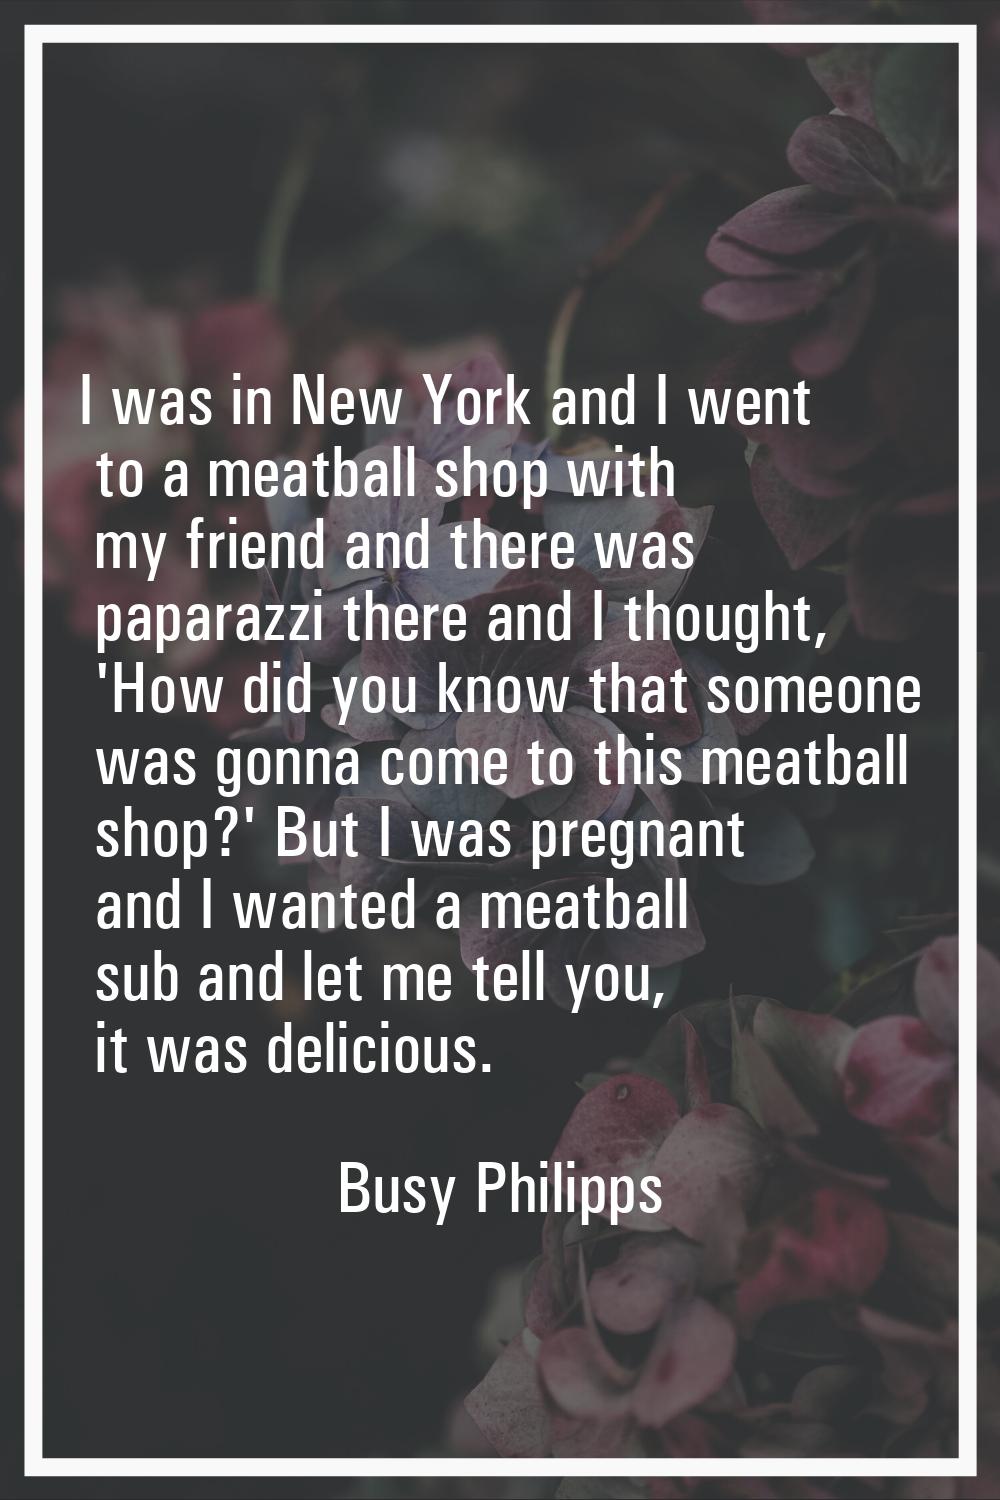 I was in New York and I went to a meatball shop with my friend and there was paparazzi there and I 